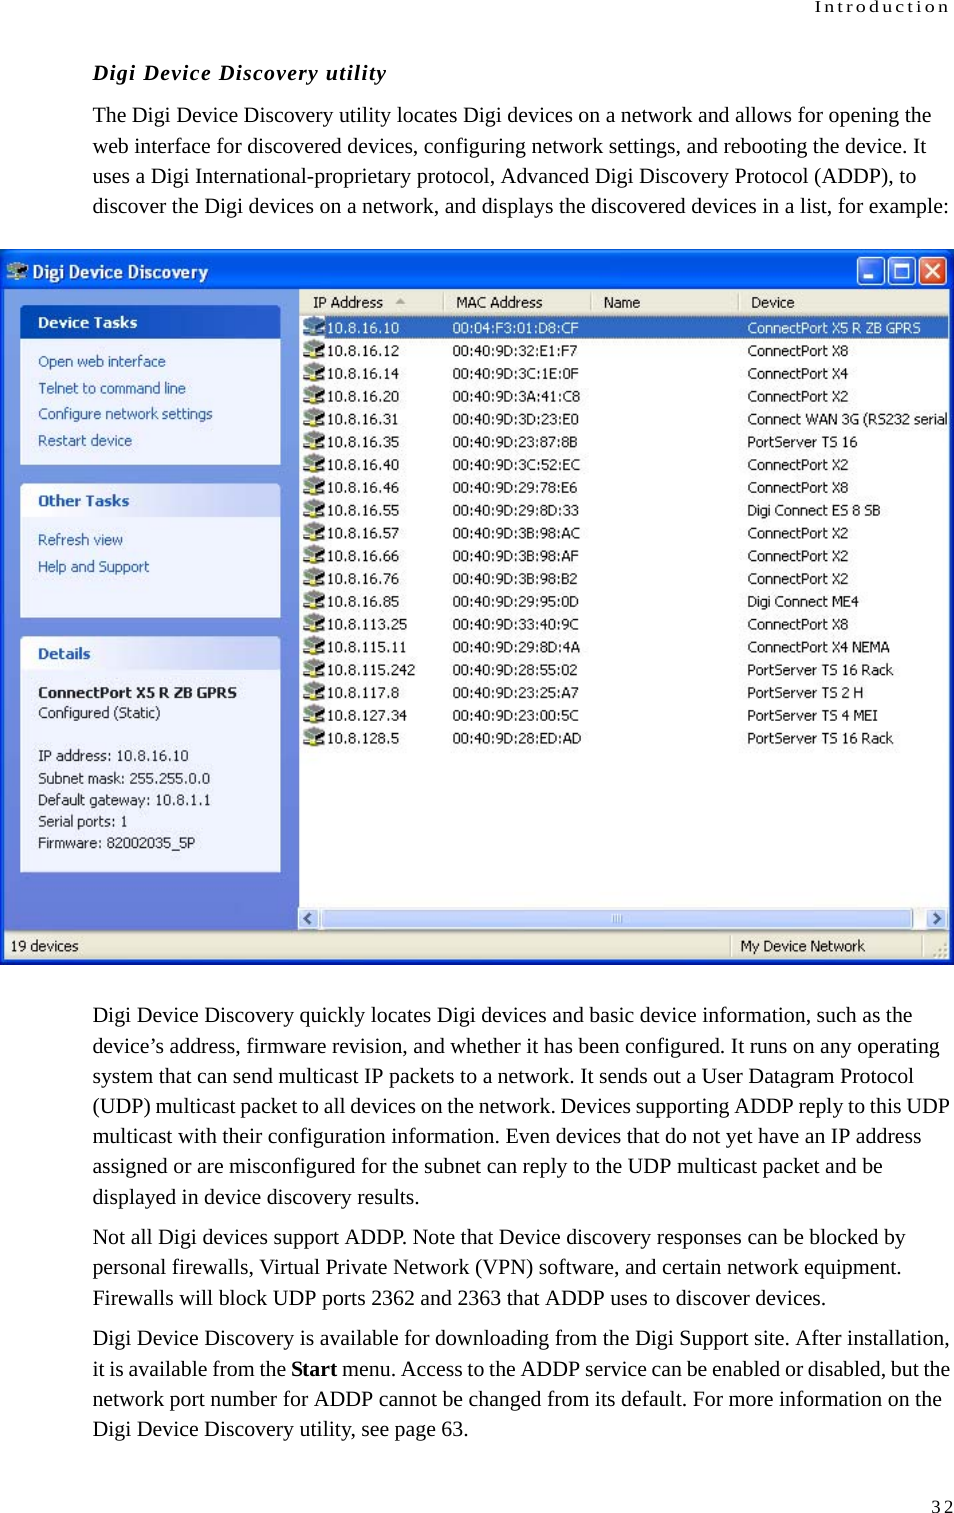 Introduction32Digi Device Discovery utilityThe Digi Device Discovery utility locates Digi devices on a network and allows for opening the web interface for discovered devices, configuring network settings, and rebooting the device. It uses a Digi International-proprietary protocol, Advanced Digi Discovery Protocol (ADDP), to discover the Digi devices on a network, and displays the discovered devices in a list, for example:Digi Device Discovery quickly locates Digi devices and basic device information, such as the device’s address, firmware revision, and whether it has been configured. It runs on any operating system that can send multicast IP packets to a network. It sends out a User Datagram Protocol (UDP) multicast packet to all devices on the network. Devices supporting ADDP reply to this UDP multicast with their configuration information. Even devices that do not yet have an IP address assigned or are misconfigured for the subnet can reply to the UDP multicast packet and be displayed in device discovery results. Not all Digi devices support ADDP. Note that Device discovery responses can be blocked by personal firewalls, Virtual Private Network (VPN) software, and certain network equipment. Firewalls will block UDP ports 2362 and 2363 that ADDP uses to discover devices. Digi Device Discovery is available for downloading from the Digi Support site. After installation, it is available from the Start menu. Access to the ADDP service can be enabled or disabled, but the network port number for ADDP cannot be changed from its default. For more information on the Digi Device Discovery utility, see page 63.